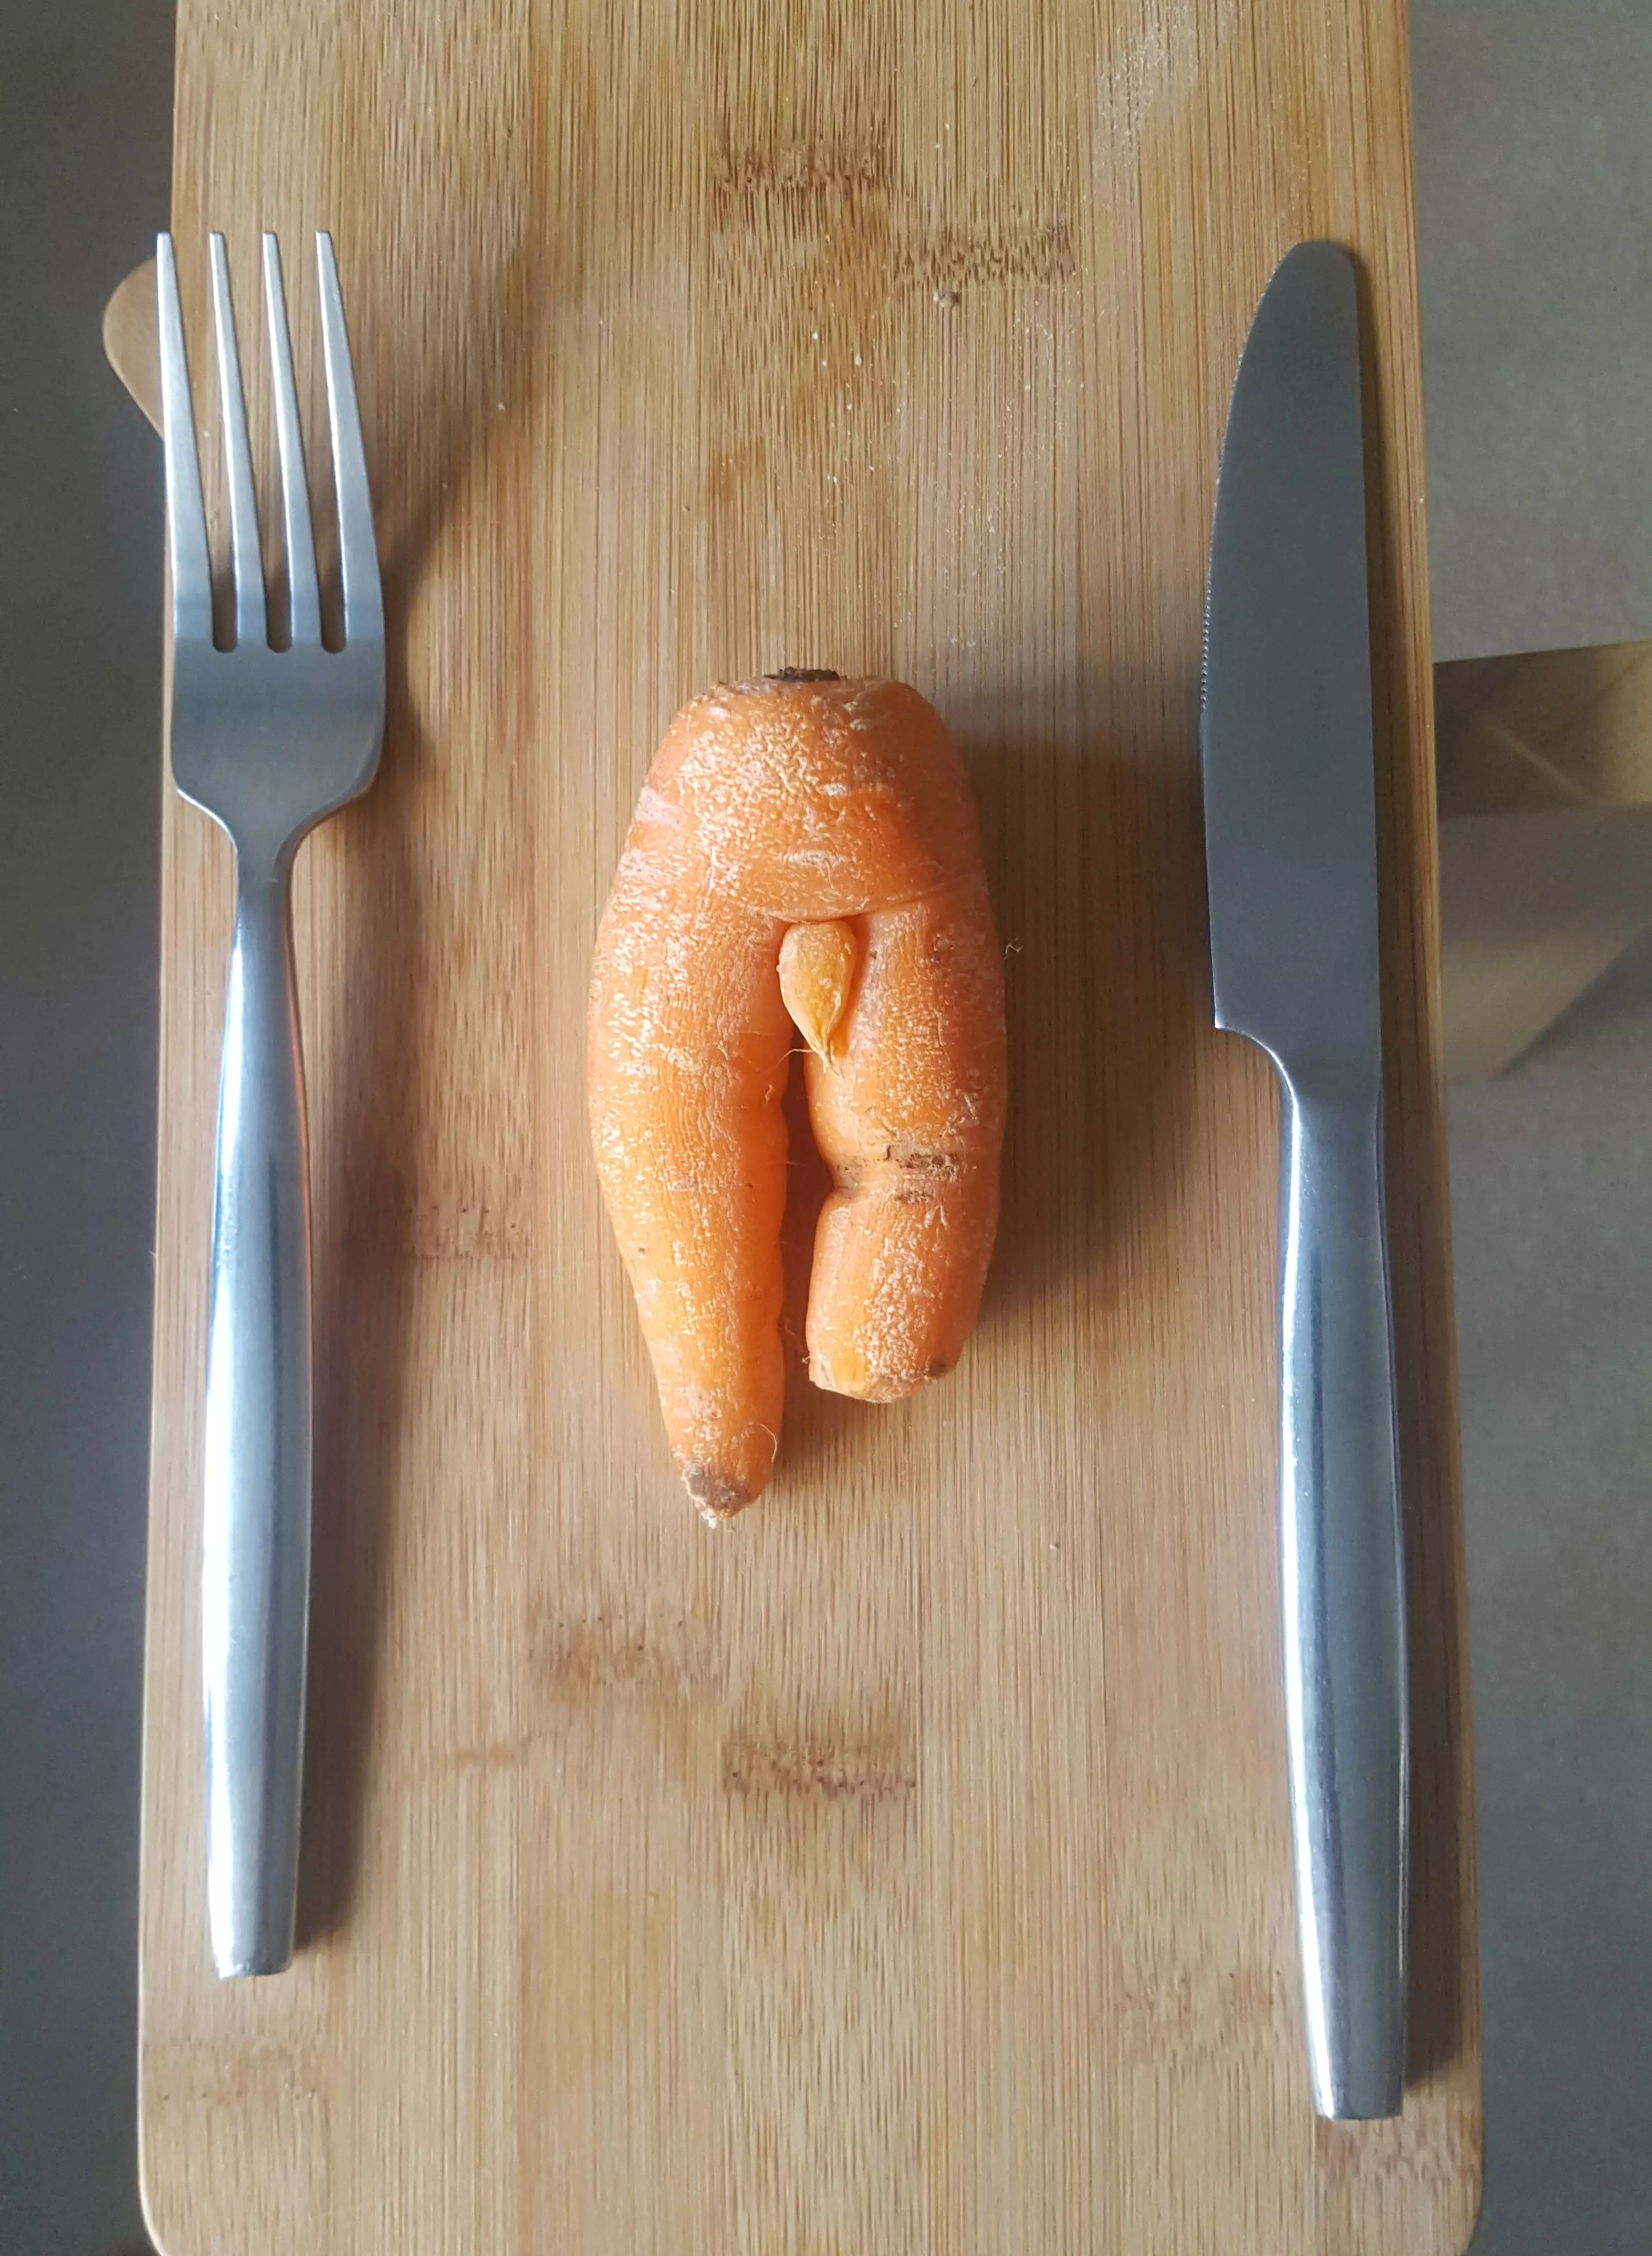 The offending carrot.